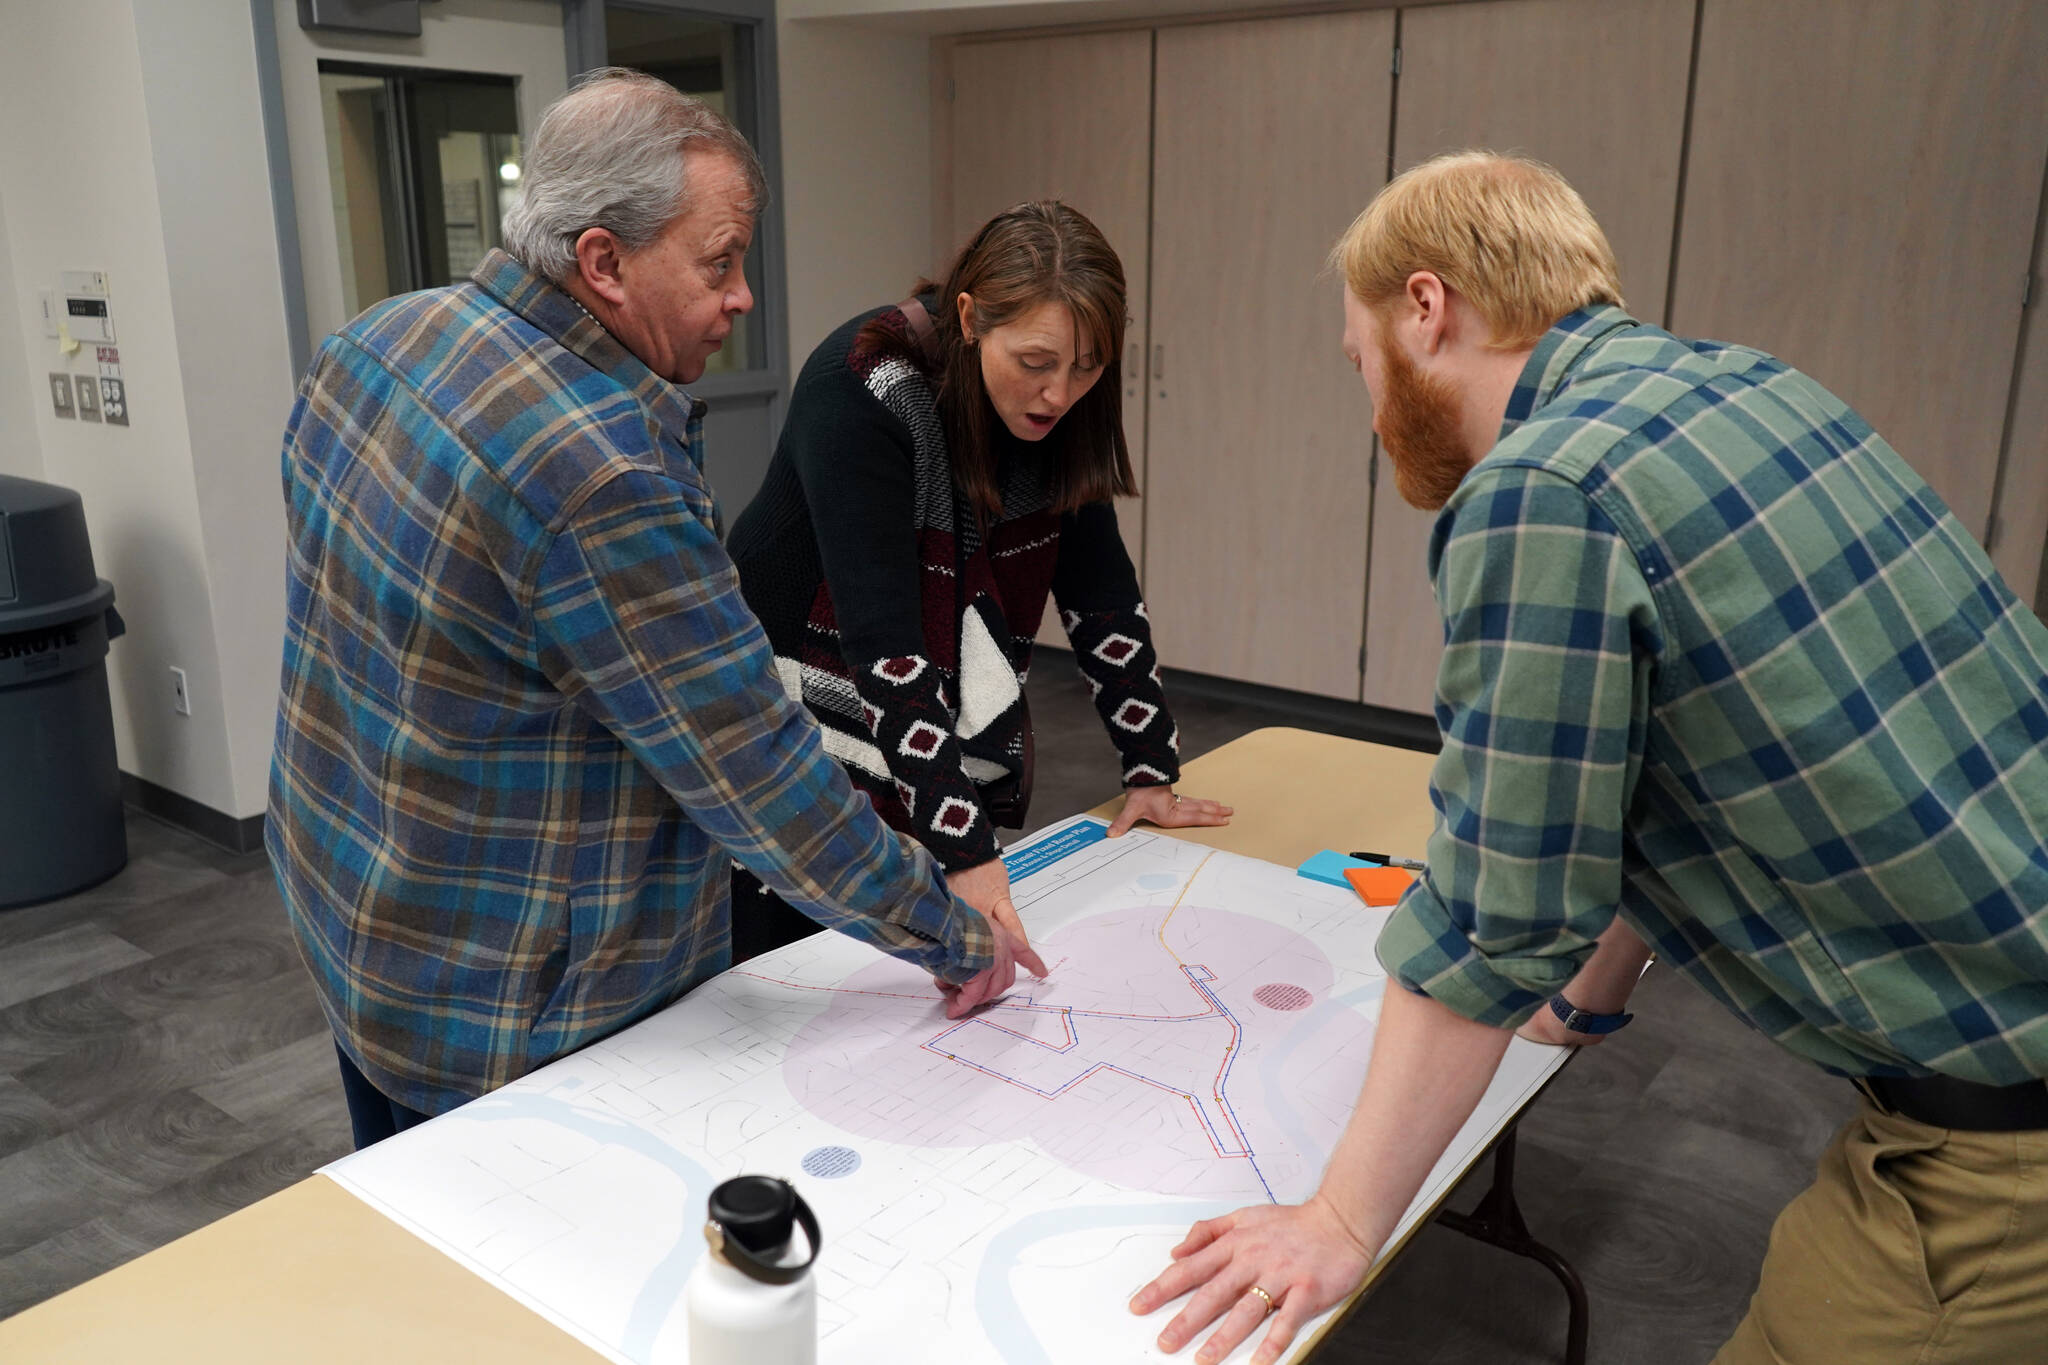 Tim Navarre, left, and Dana Cannava discuss a preliminary Soldotna route for the Kahtnu Area Transit with Planner Bryant Wright at the Challenger Learning Center of Alaska in Kenai, Alaska, on Wednesday, Nov. 29, 2023. (Jake Dye/Peninsula Clarion)